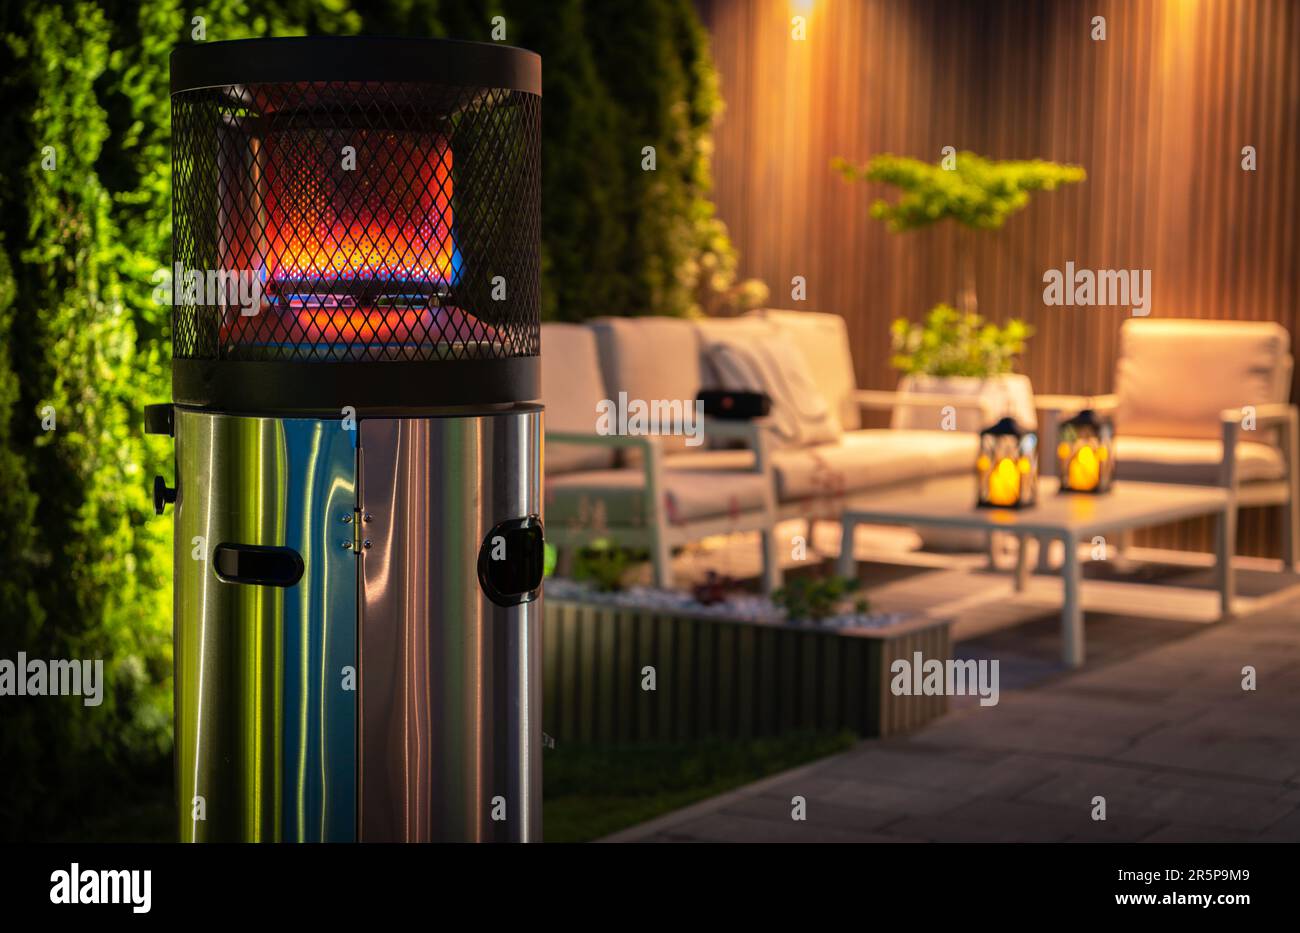 Outdoor Patio Propane Gas Heater For Cold Evenings in Garden Area. Burning Heater in Front of Outdoor Relaxing Area During Night Time. Stock Photo